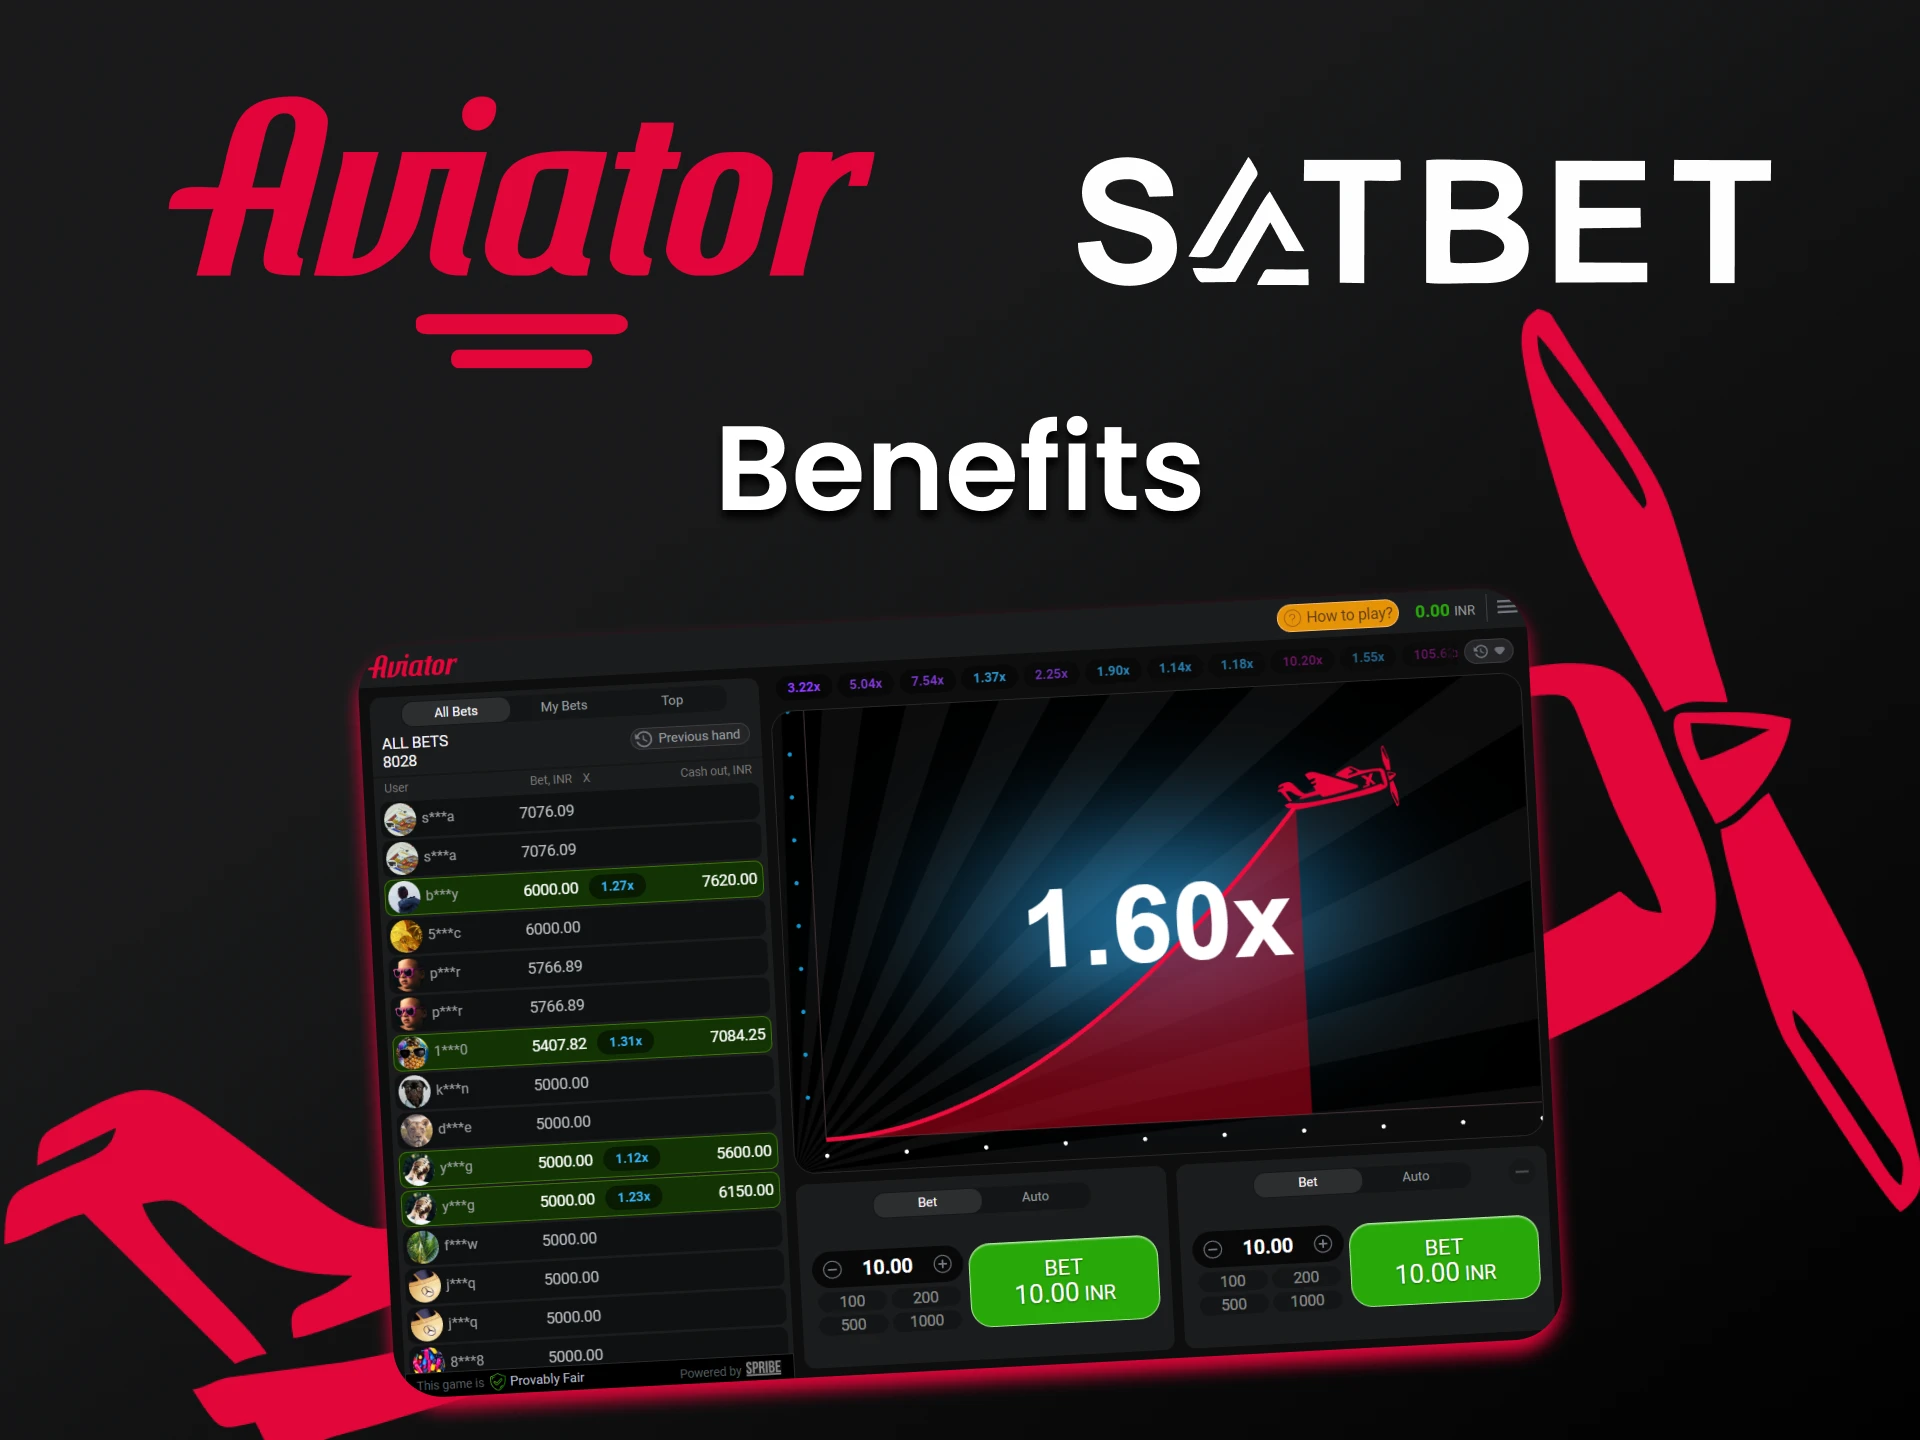 The Satbet website has many advantages for playing Aviator.